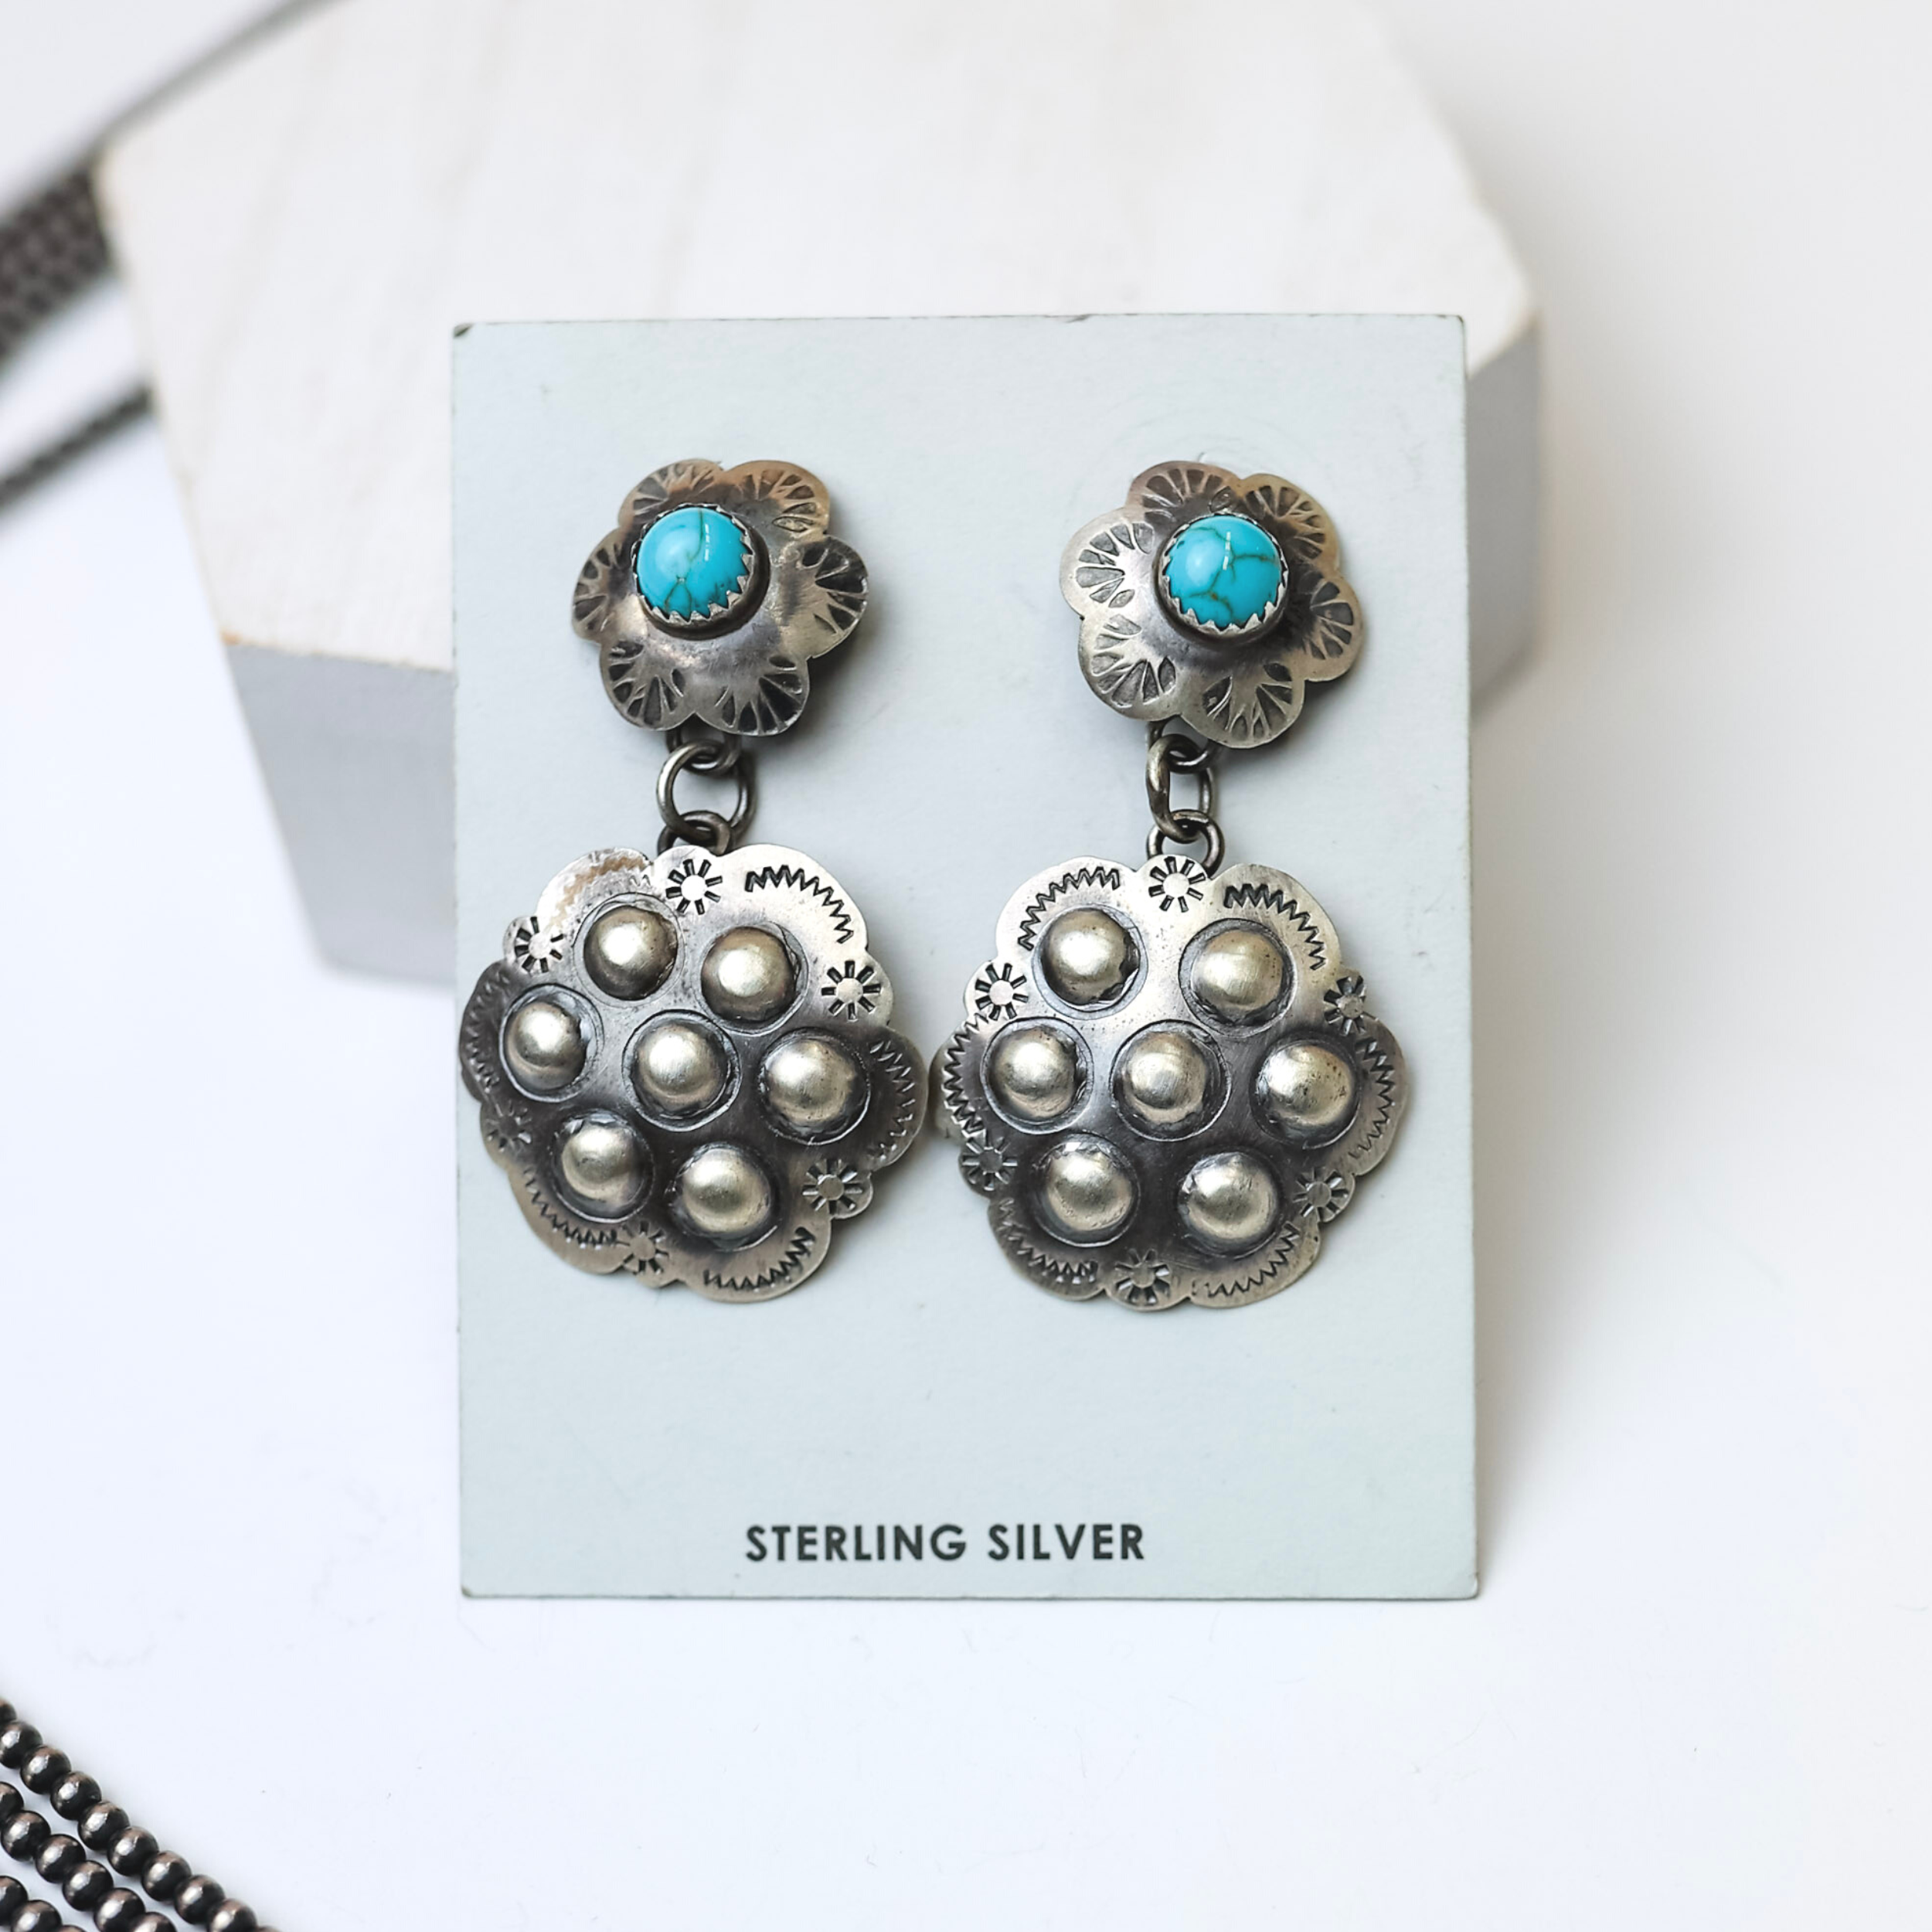 Tim Yazzie Navajo Handmade Sterling Silver Flower Drop Earrings with Turquoise Studs are centered in the picture, with navajo pearls laid to the left of the earrings. All on a white background. 